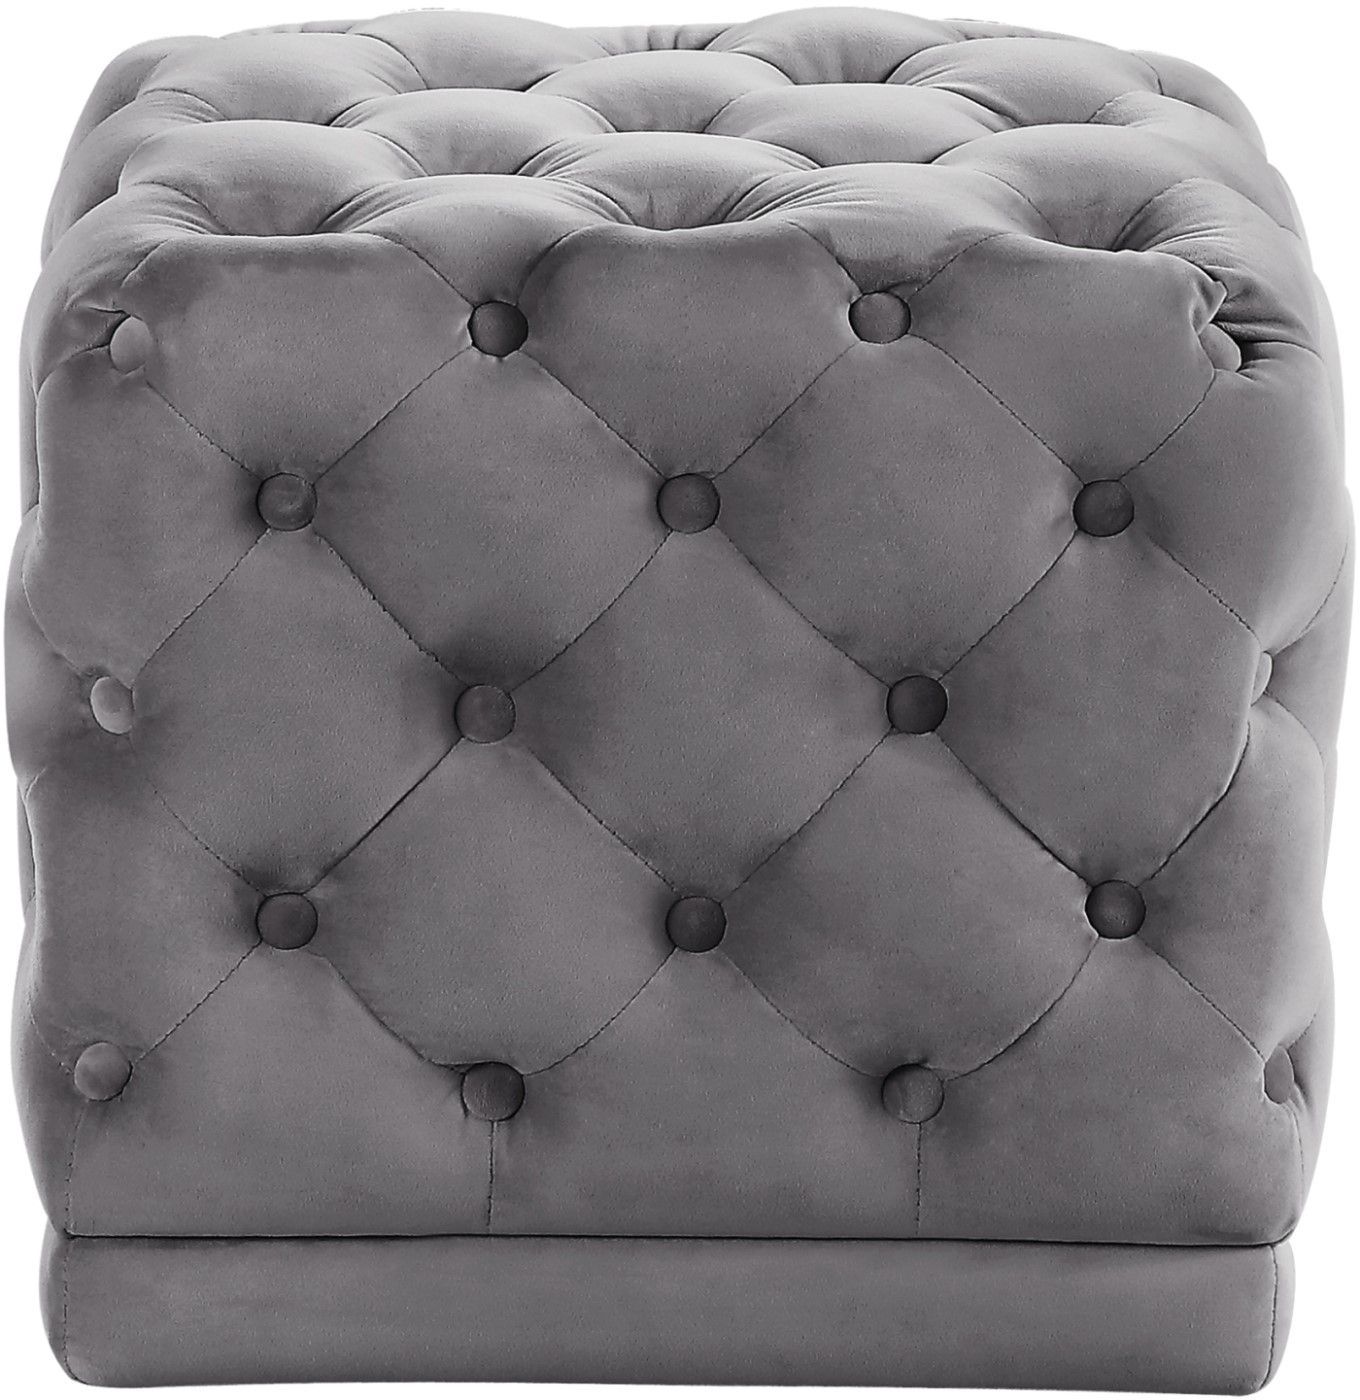 Neville Contemporary Deep Button Tufted Cube Ottoman In Plush Dark Grey Inside Tufted Gray Velvet Ottomans (View 16 of 20)